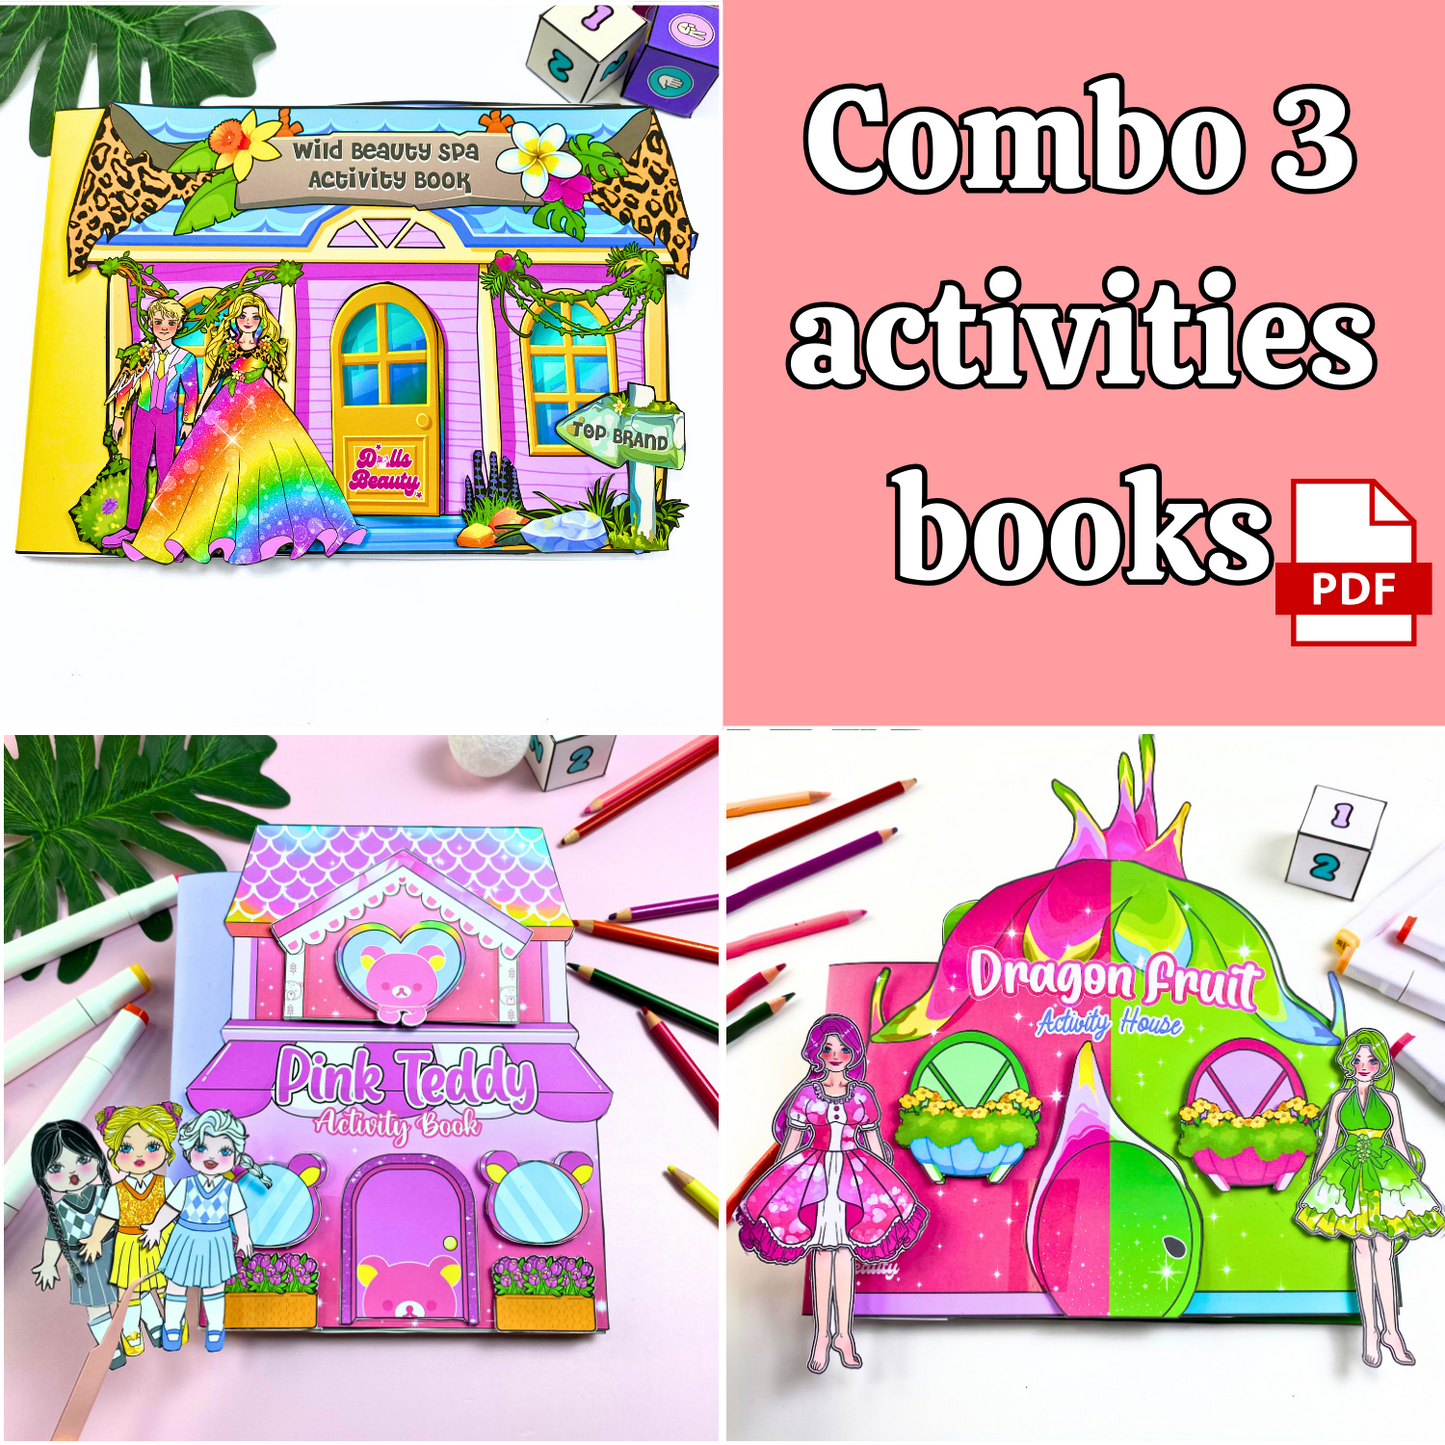 Dragon Fruit Paper Dollhouse, Dragon Fruit Story DollHouse Activities for Kids, Busy Book, DIY crafts kit, Gifts for kids